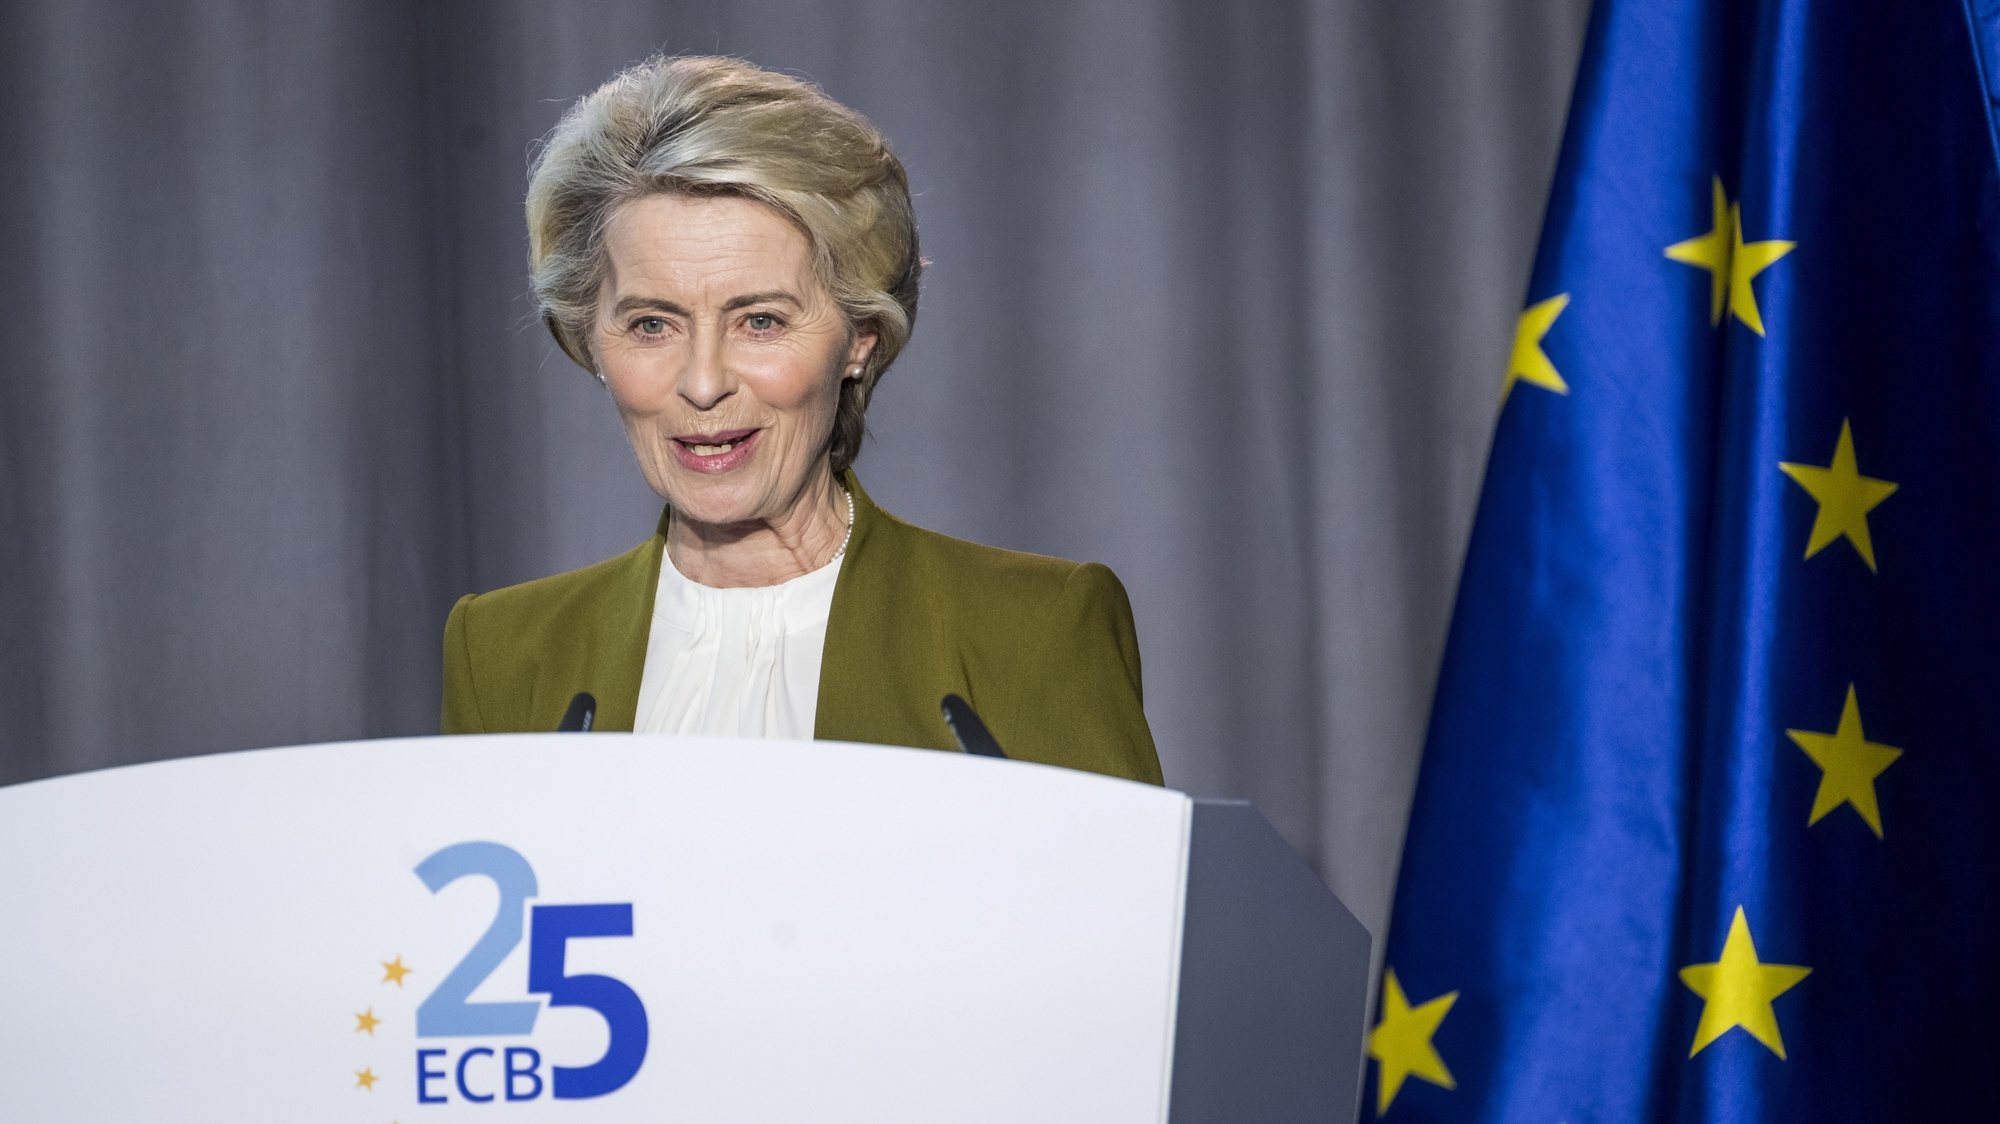 epa10651286 The President of the European Commission Ursula von der Leyen speaks during the celebrations of the 25th anniversary of the European Central Bank (ECB) in Frankfurt, Germany, 24 May 2023. The ECB began work in 1998 in preparation for the introduction of Europe&#039;s single currency, the Euro, which took place a year later.  EPA/THOMAS LOHNES / POOL